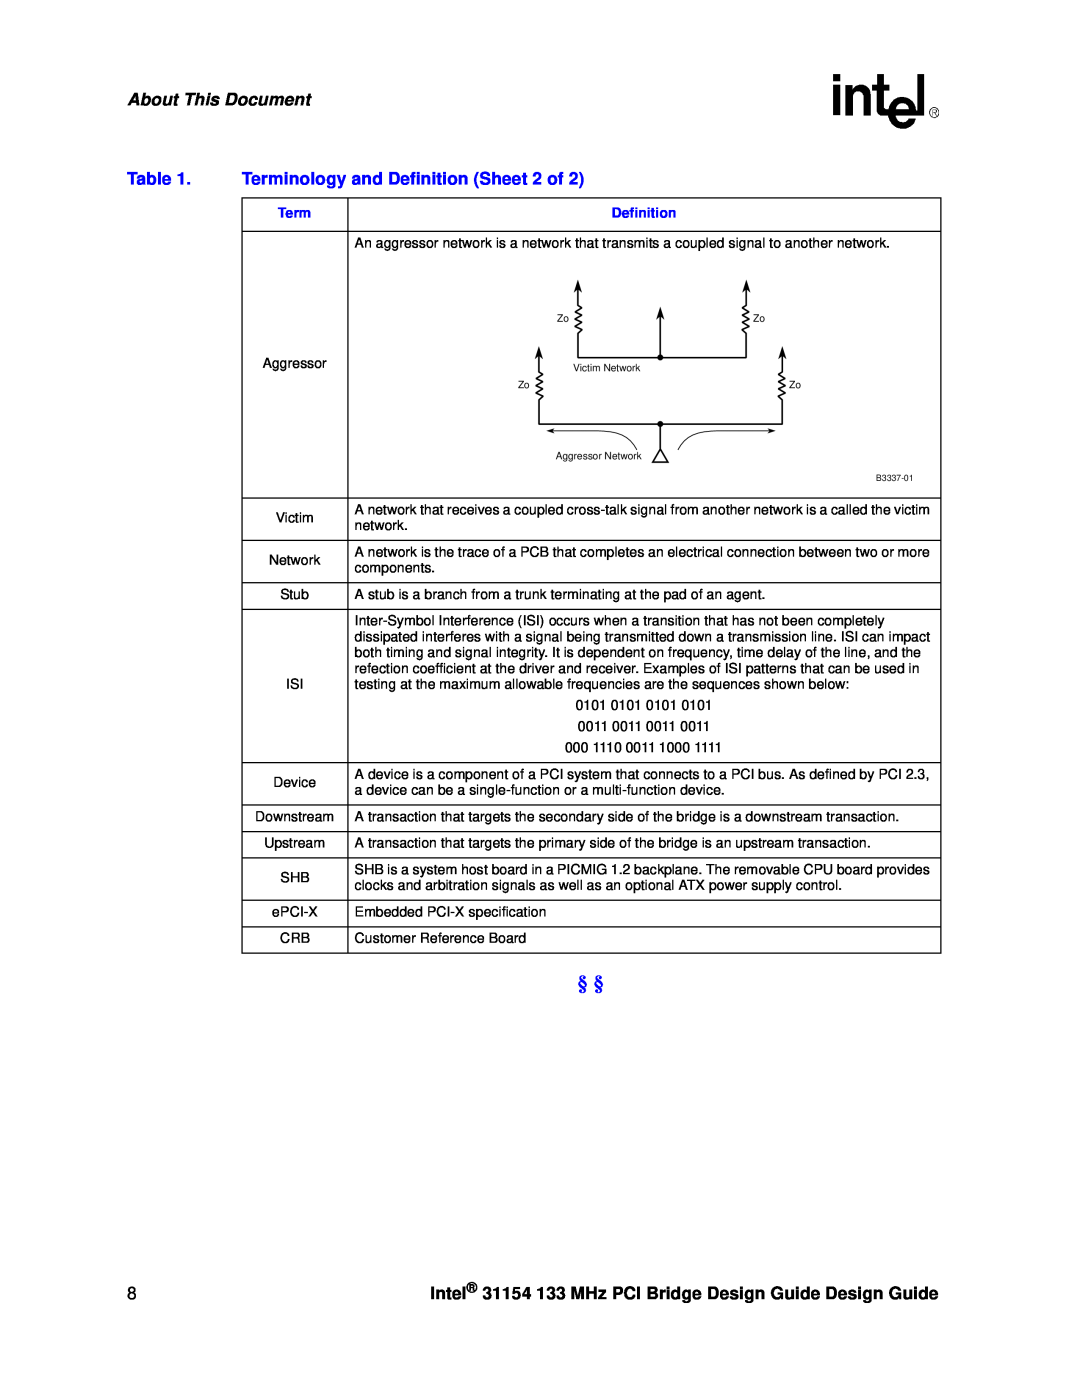 Intel 31154 manual Terminology and Definition Sheet 2 of, About This Document 